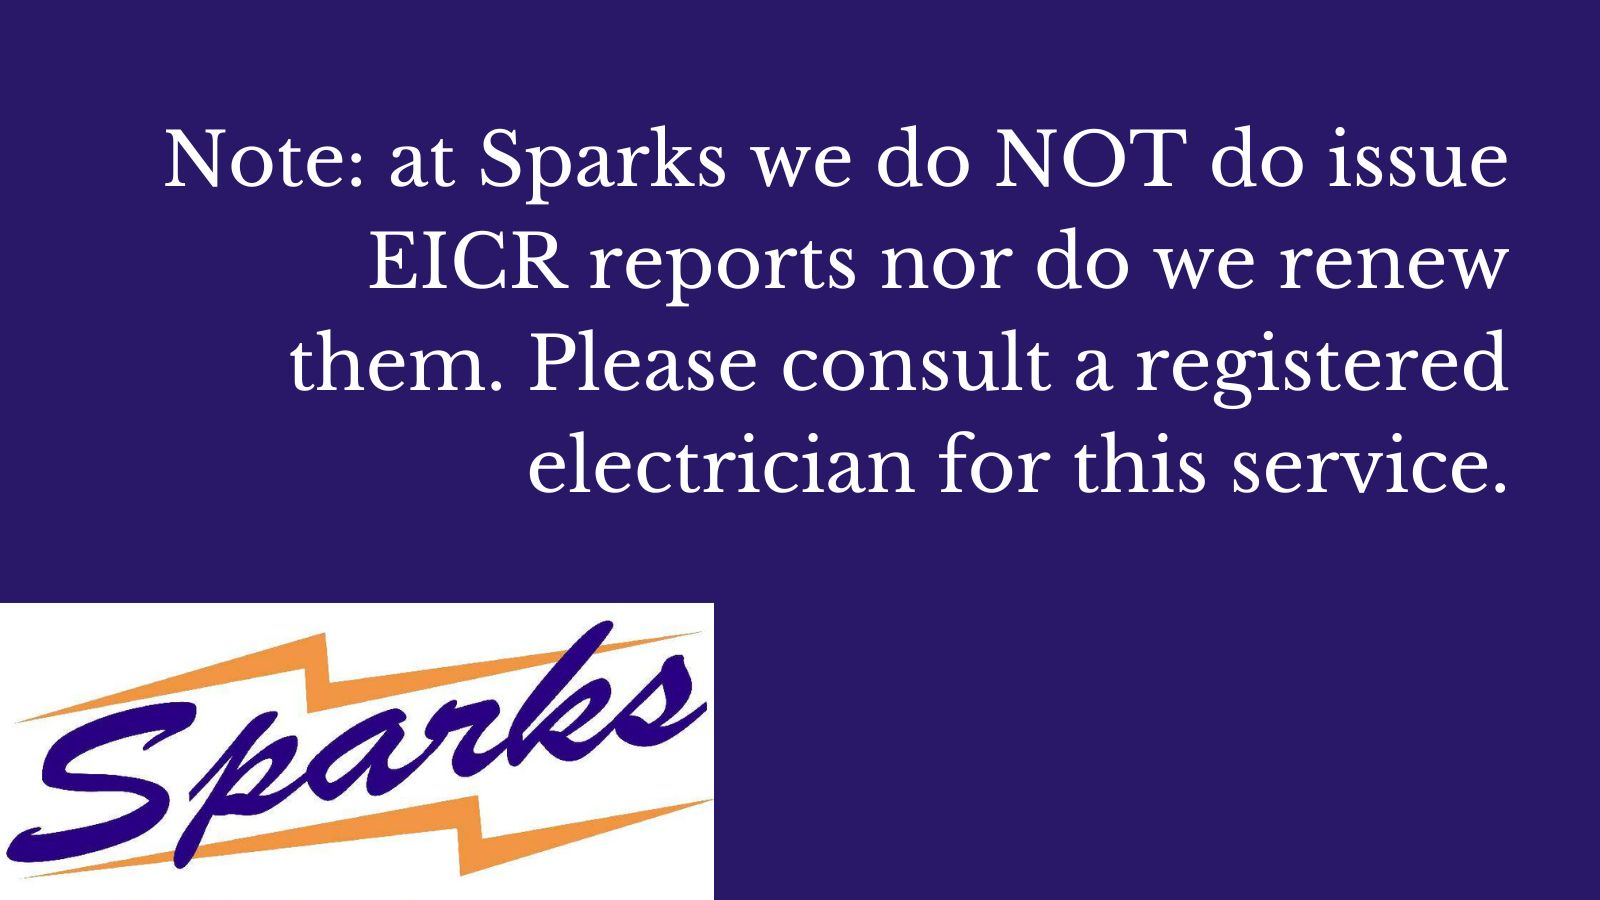 Note: at Sparks we do NOT do issue EICR reports nor do we renew them. Please consult a registered electrician for this service.